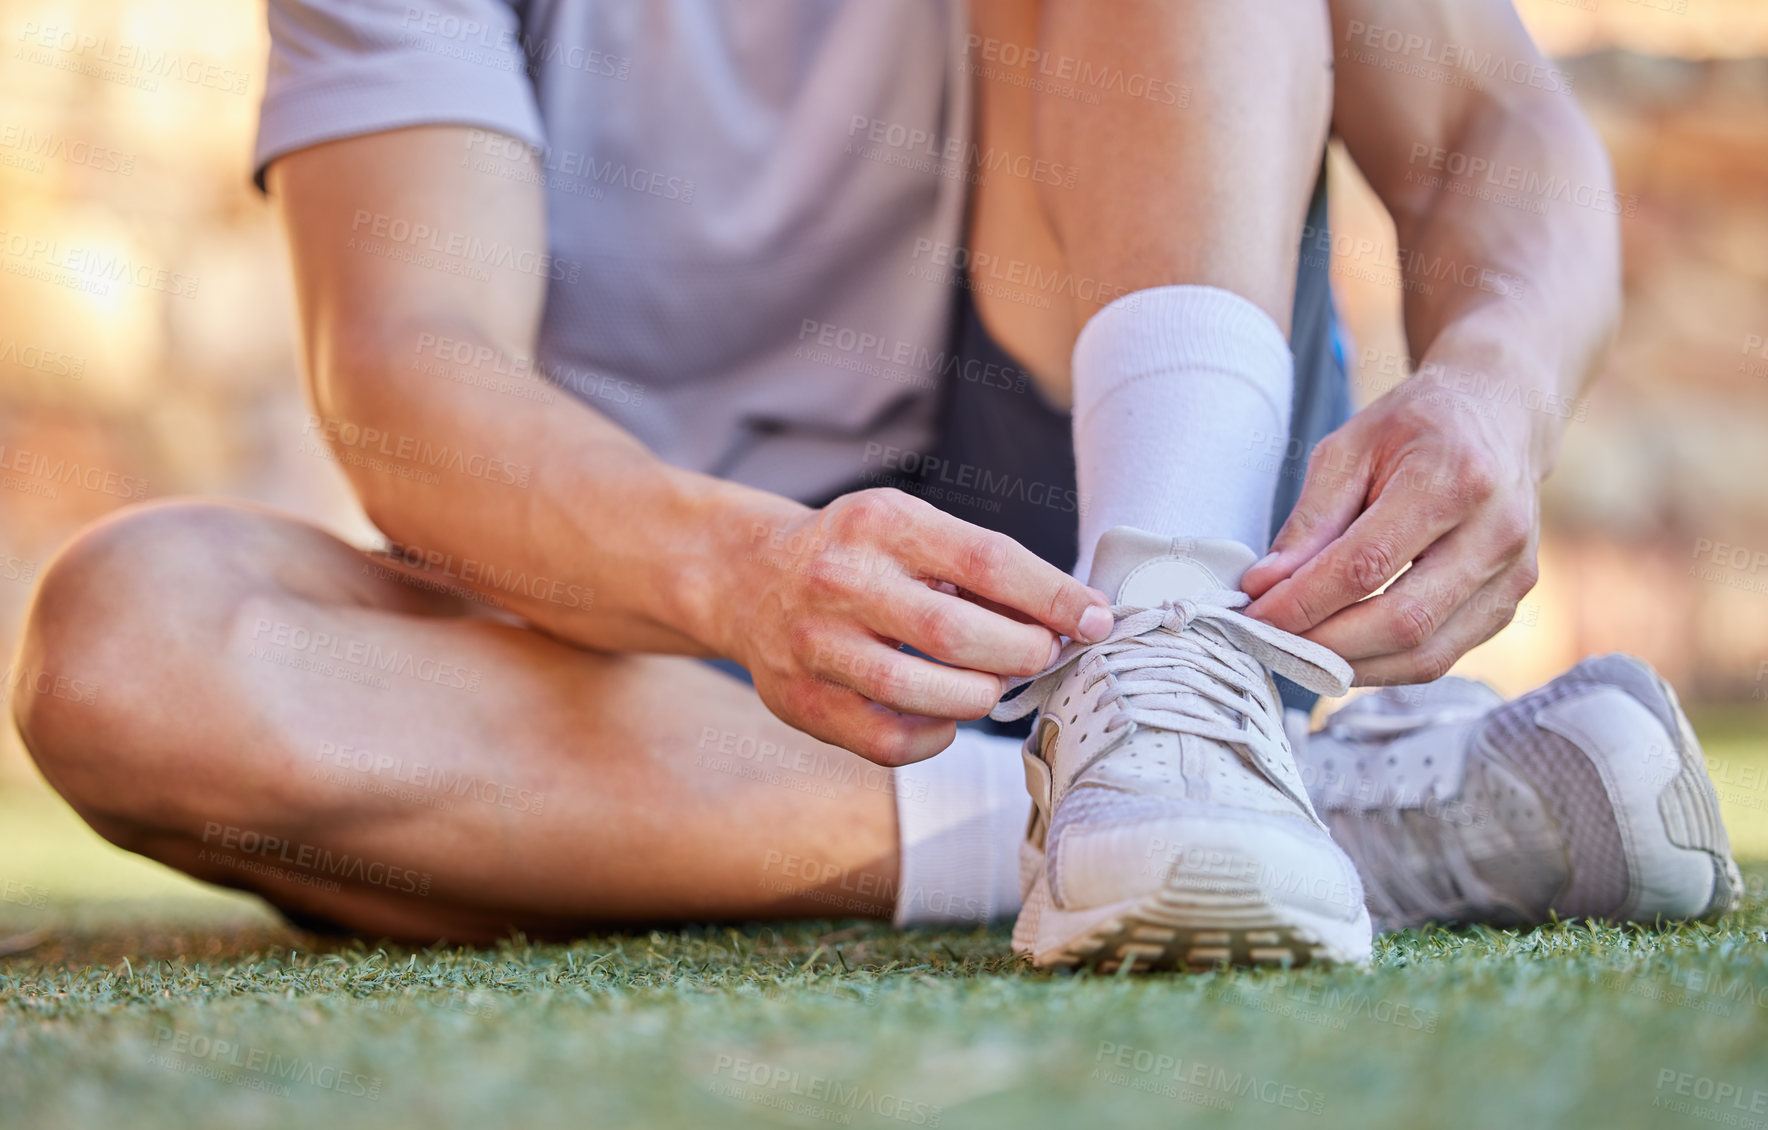 Buy stock photo Shot of an unrecognizable man tying the laces of his running shoes